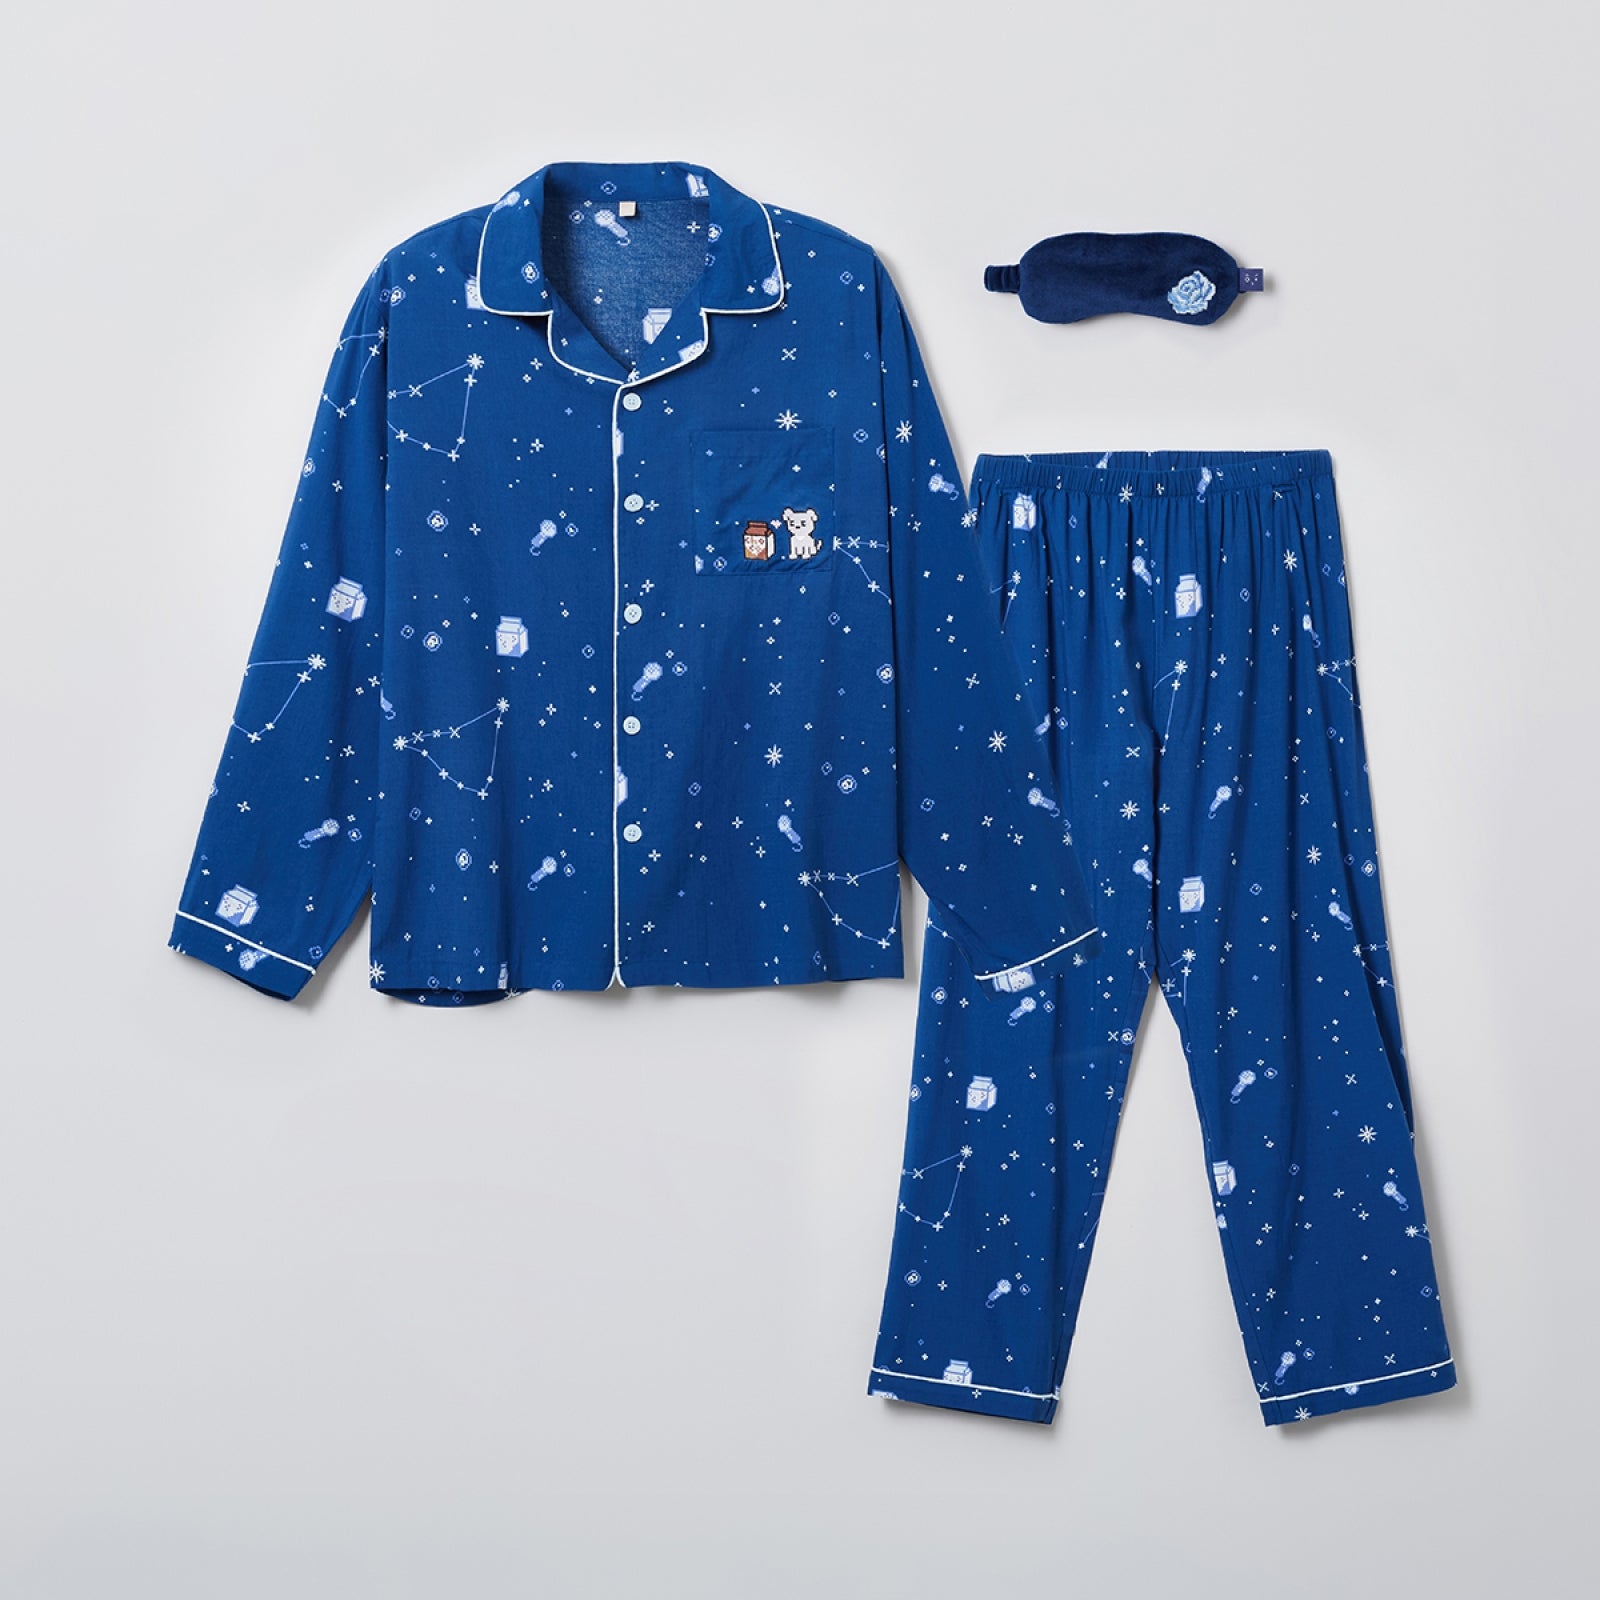 SPAO X ZB1 Good Night Collection